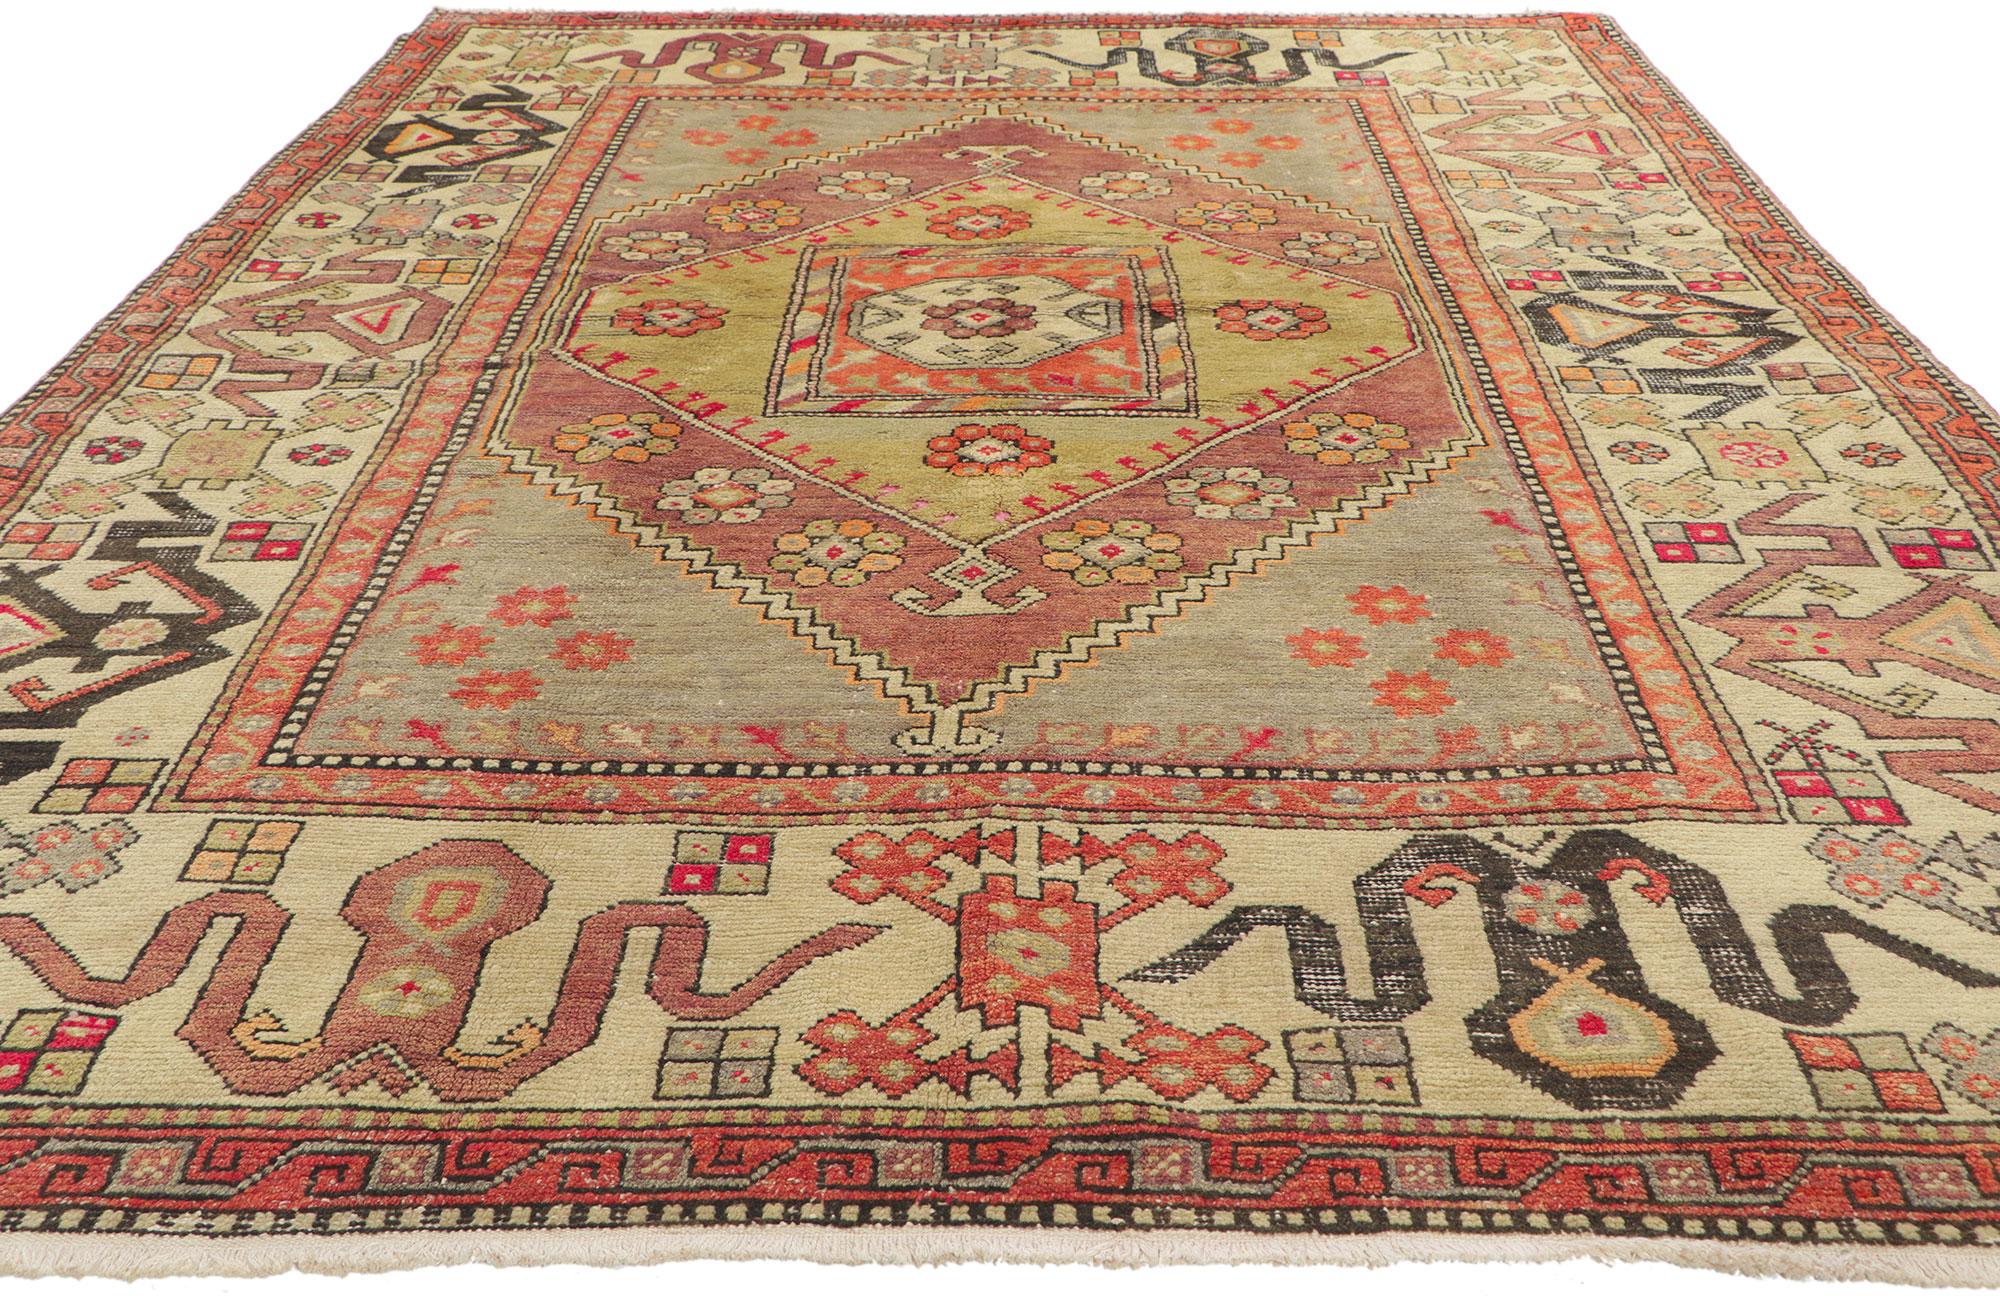 51651 vintage Turkish Oushak rug, 05’07 x 07’10.
Showcasing a bold expressive design, incredible detail and texture, this hand knitted wool vintage Turkish Oushak rug is a captivating vision of woven beauty. The eye-catching medallion design and